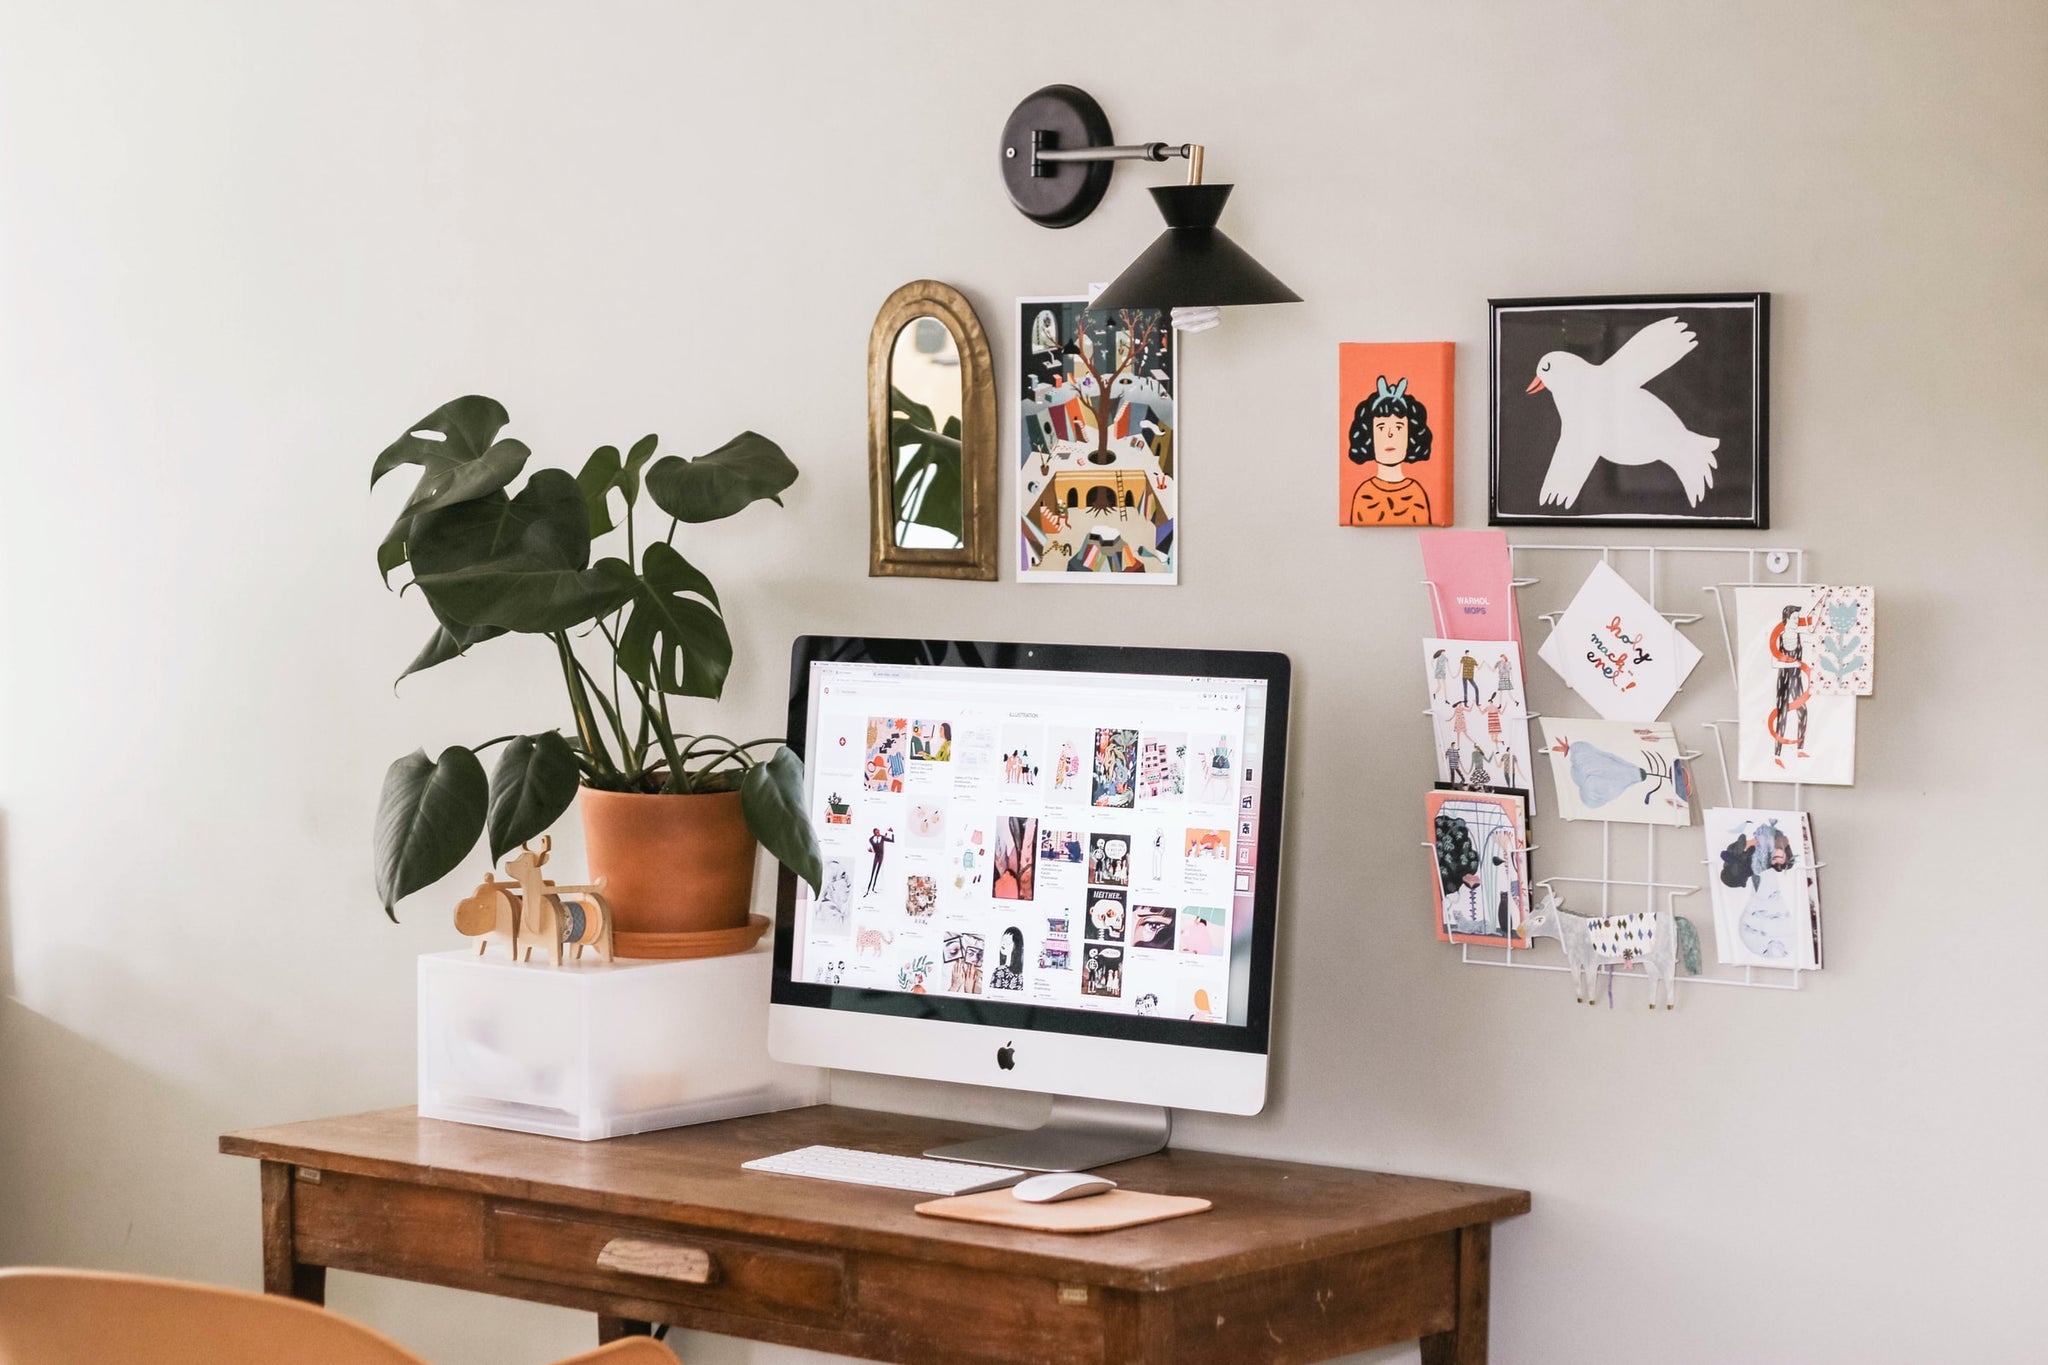 Make Your Work Space as Productive as Possible With These 8 Expert Tips